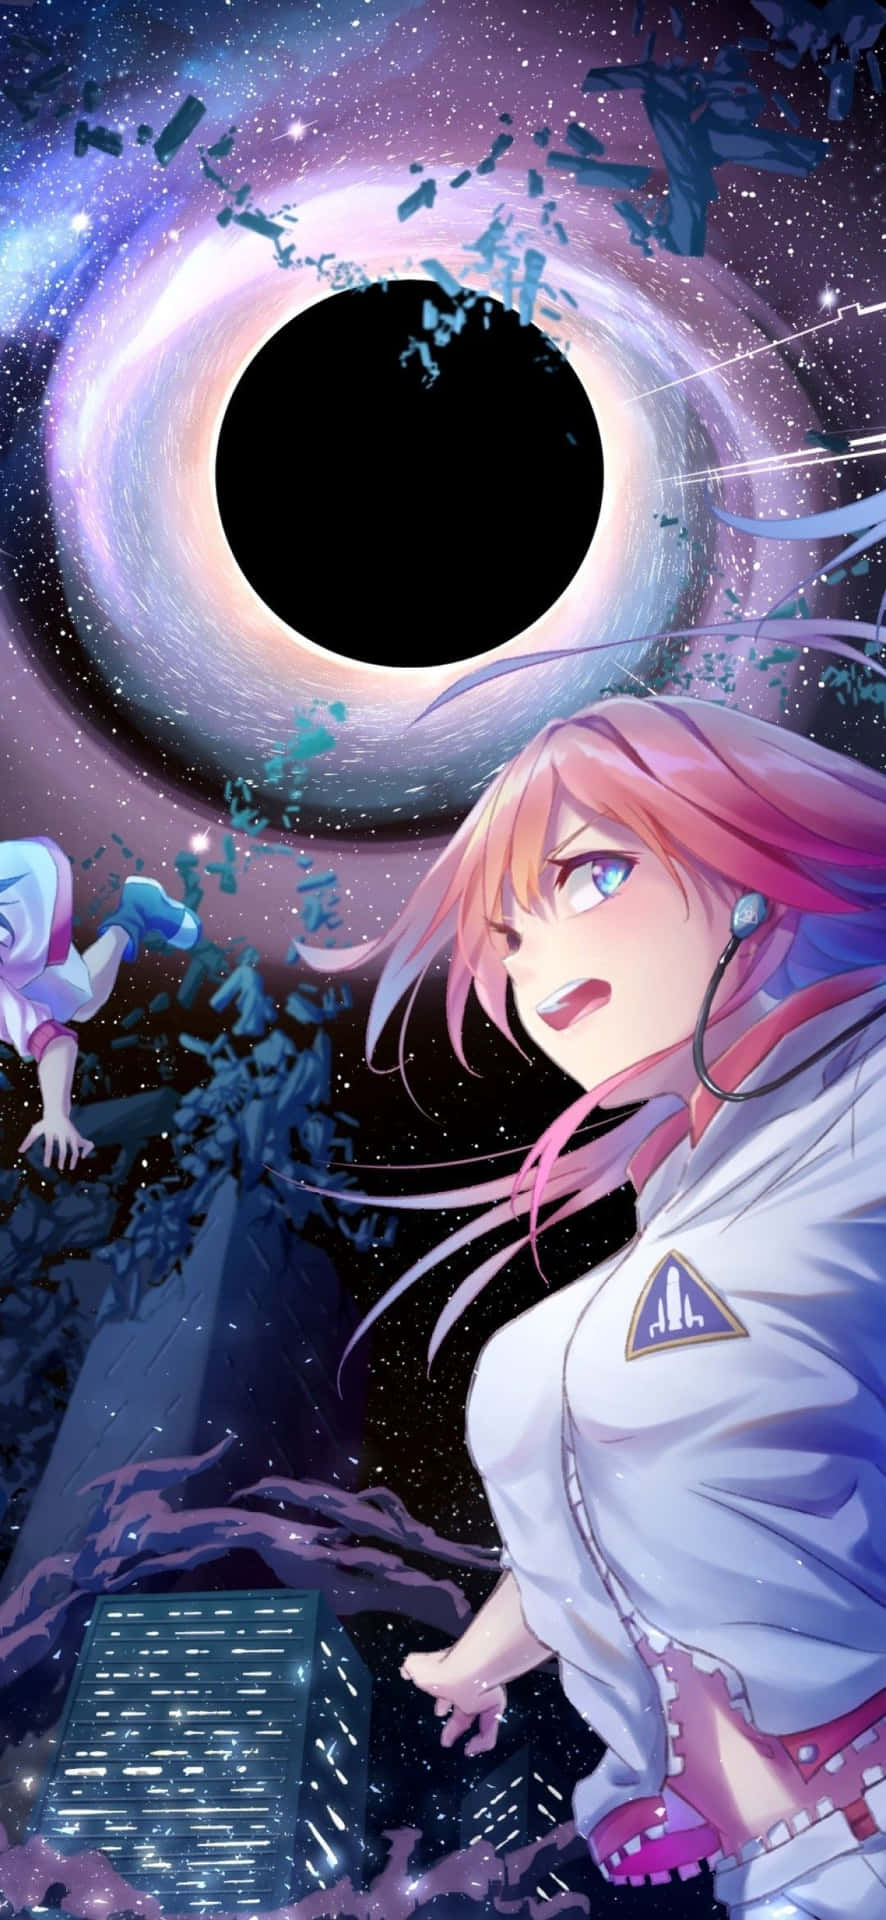 From fantasy to reality, Animecore opens up a whole new world of possibilities Wallpaper